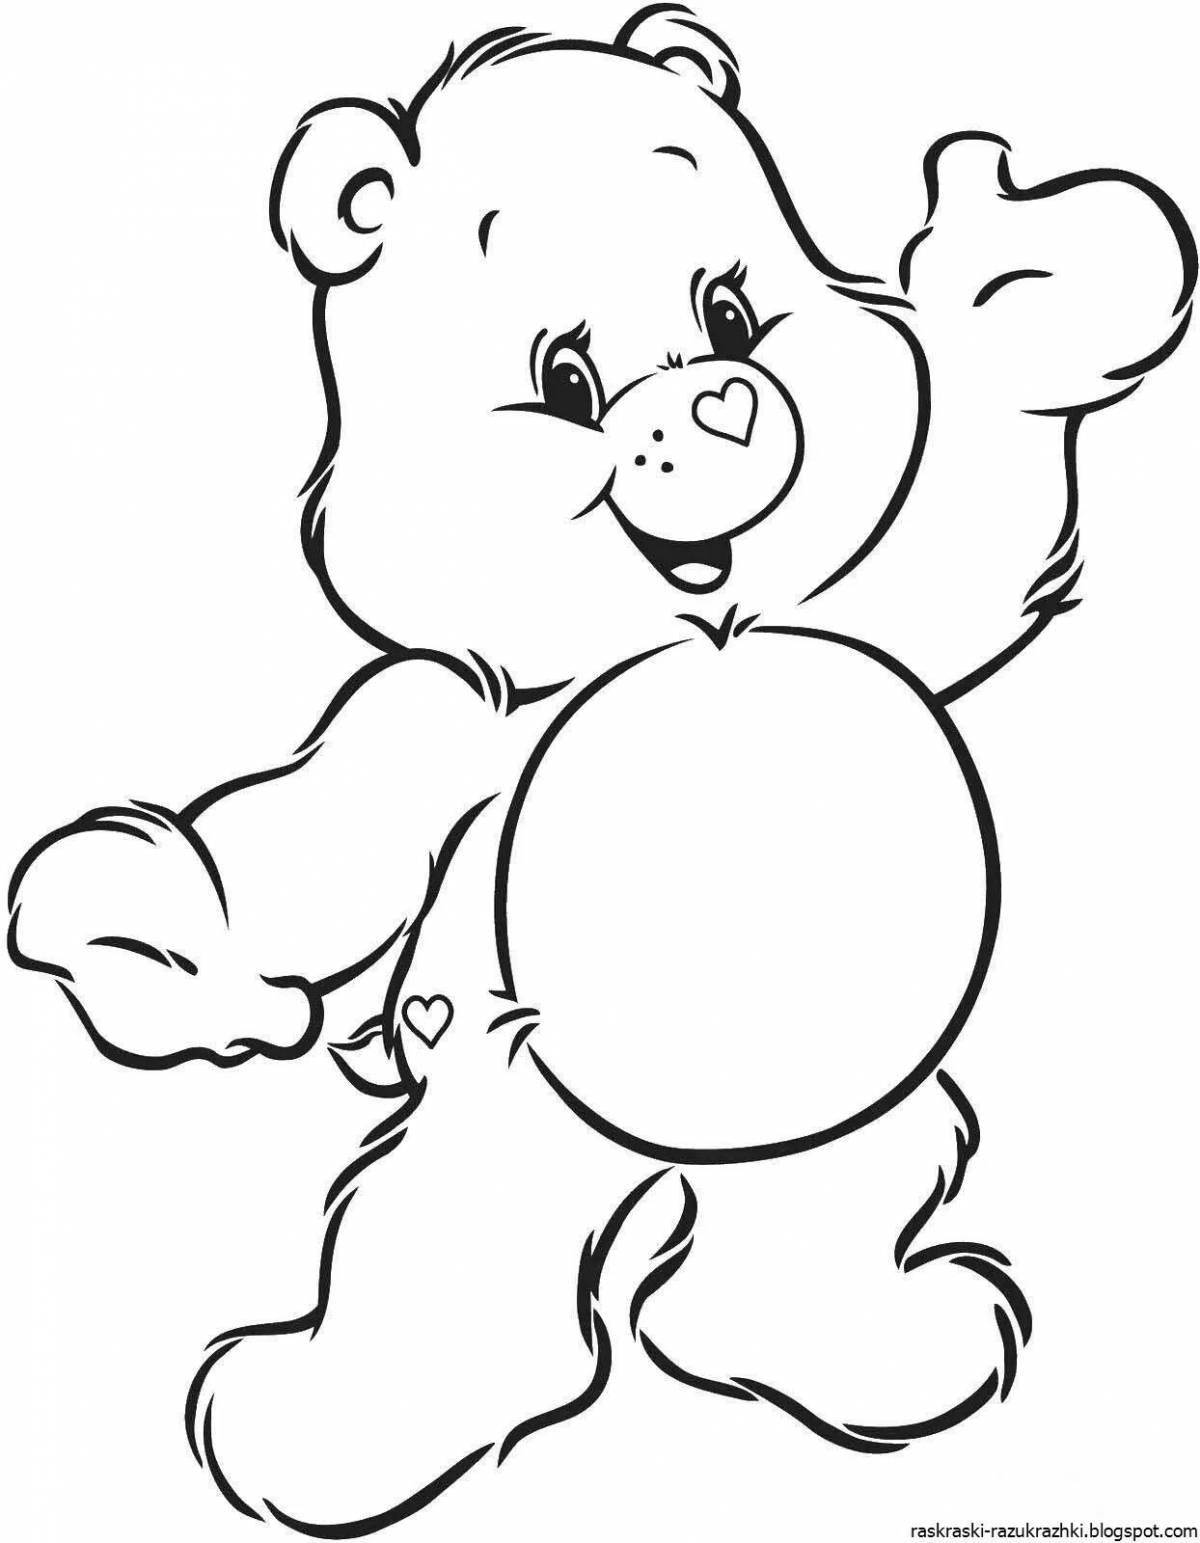 Coloring book shining bear for kids